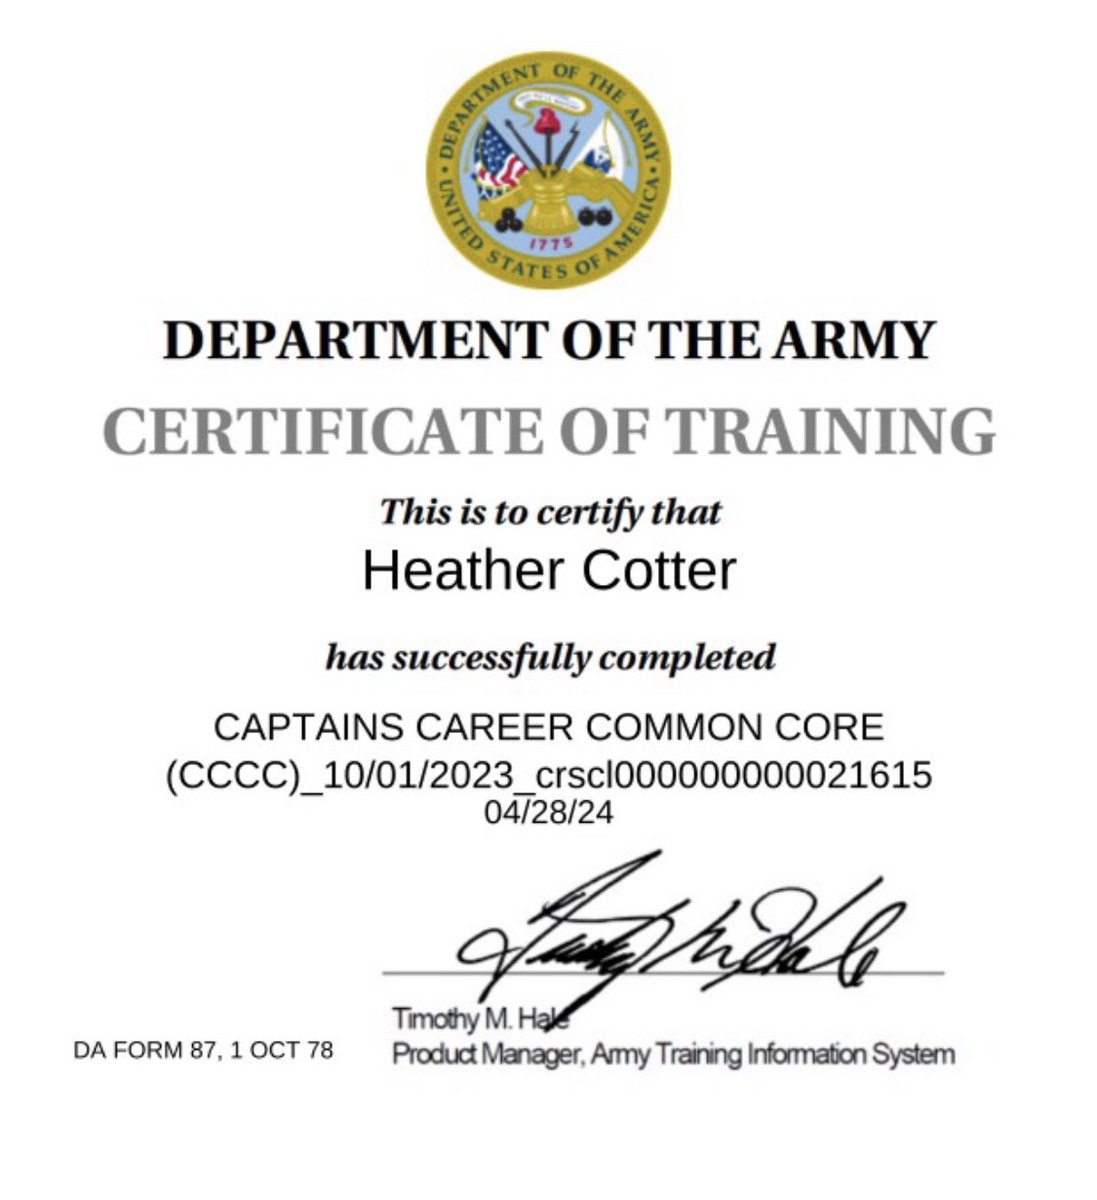 Now that I’ve completed Captains Career Common Core, I am ready to start the residence course at Fort Liberty, N.C. Looking forward to it! Wish me luck! #BeAllYouCanBe #CivilAffairs